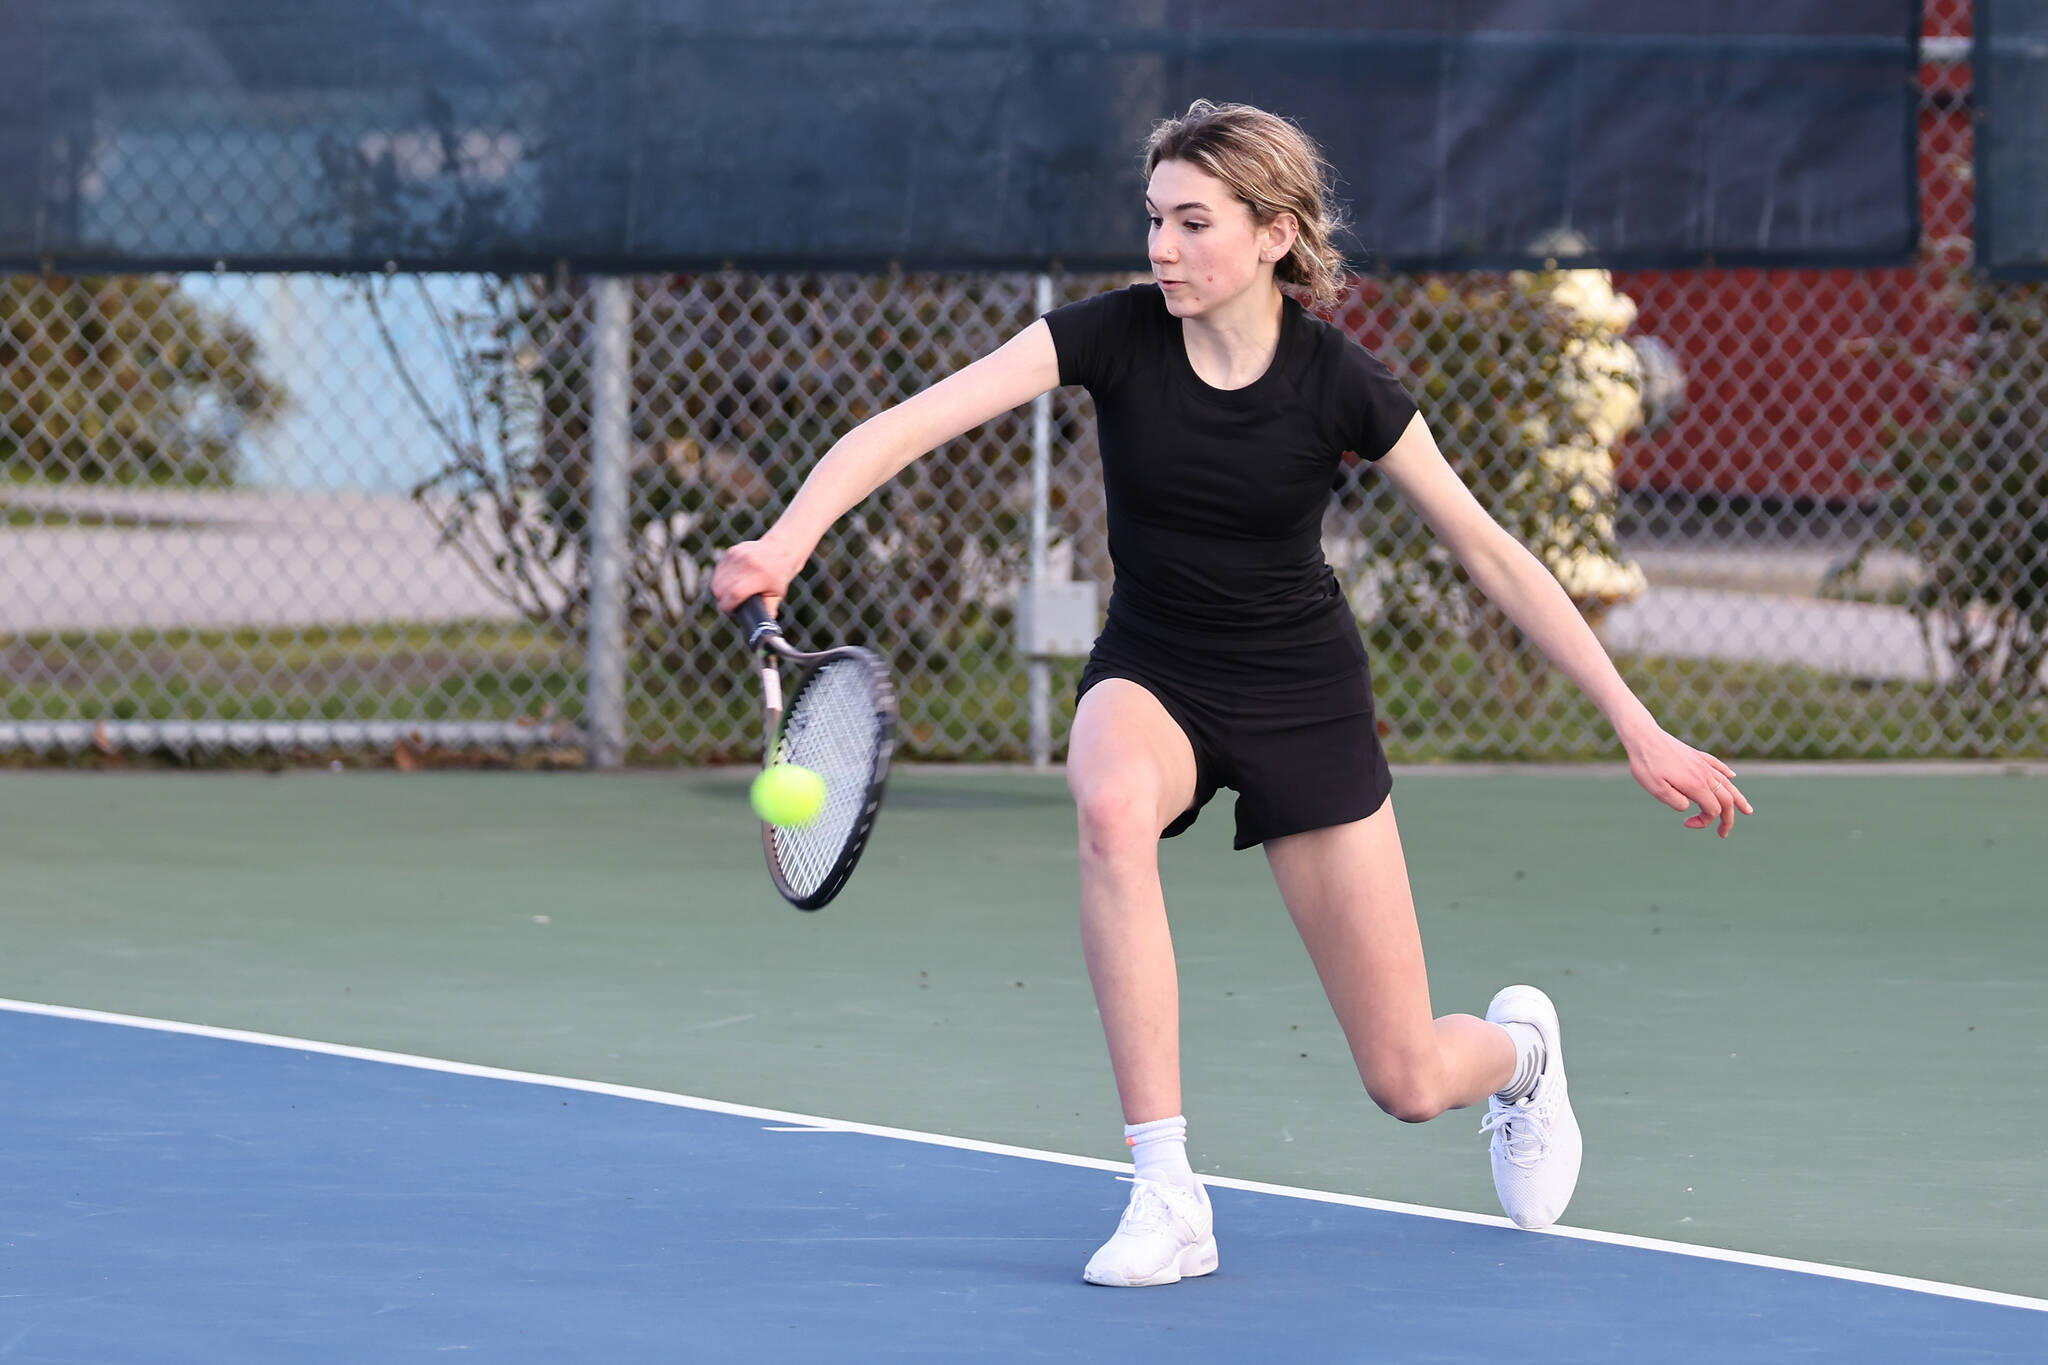 Photo by John Fisken
South Whidbey junior Abby Amundson, No. 1 singles in varsity, returns the ball during a match against Oak Harbor March 16.